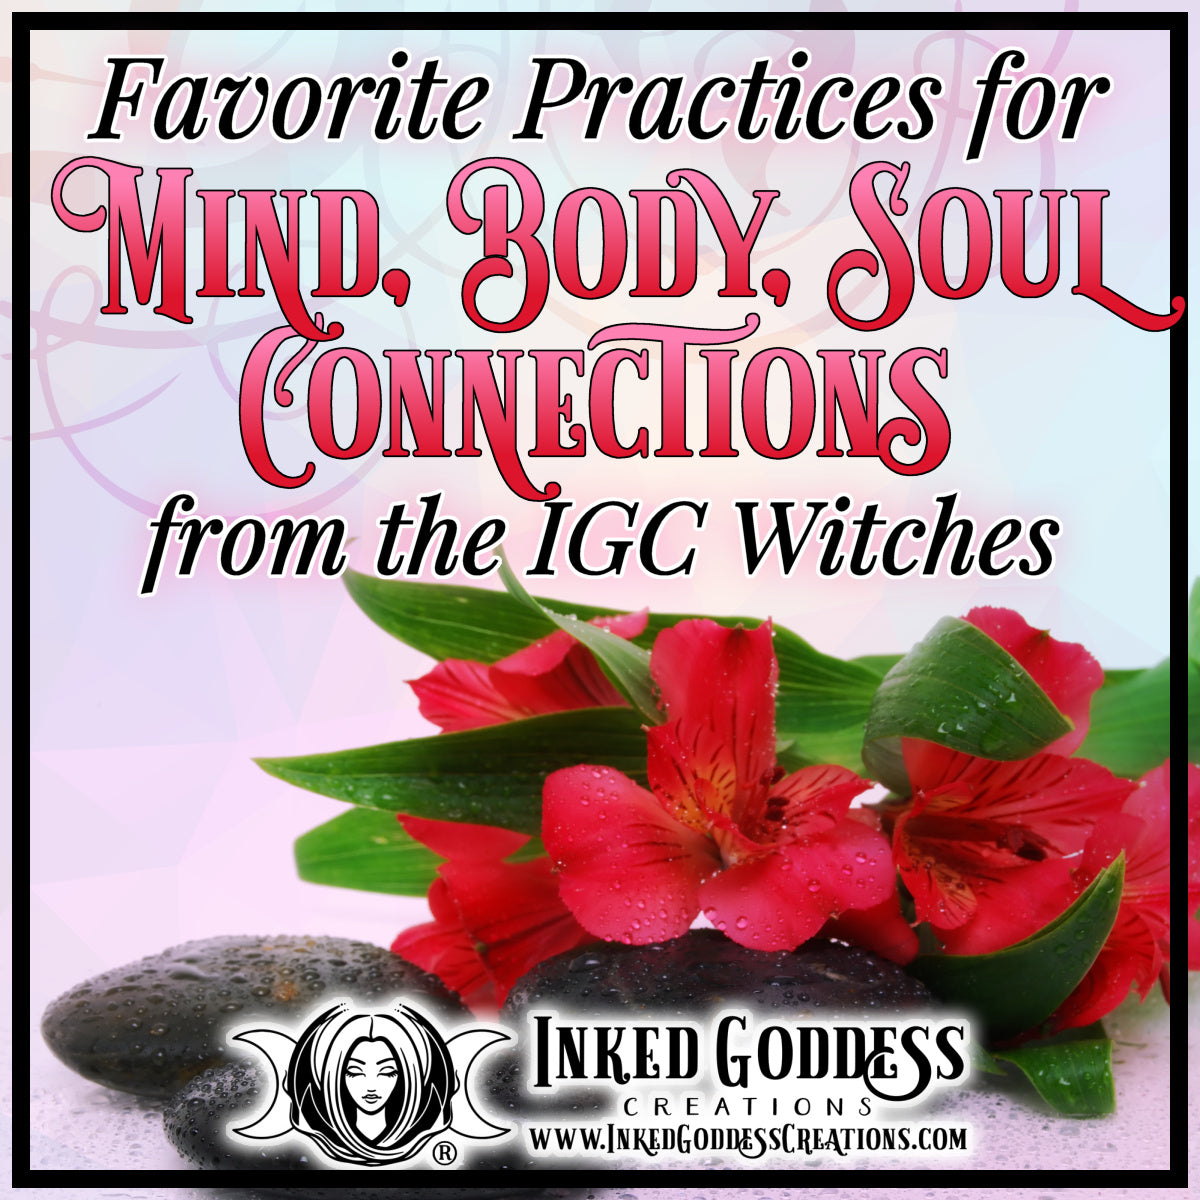 Favorite Practices for Mind, Body, Soul Connections from the IGC Witches